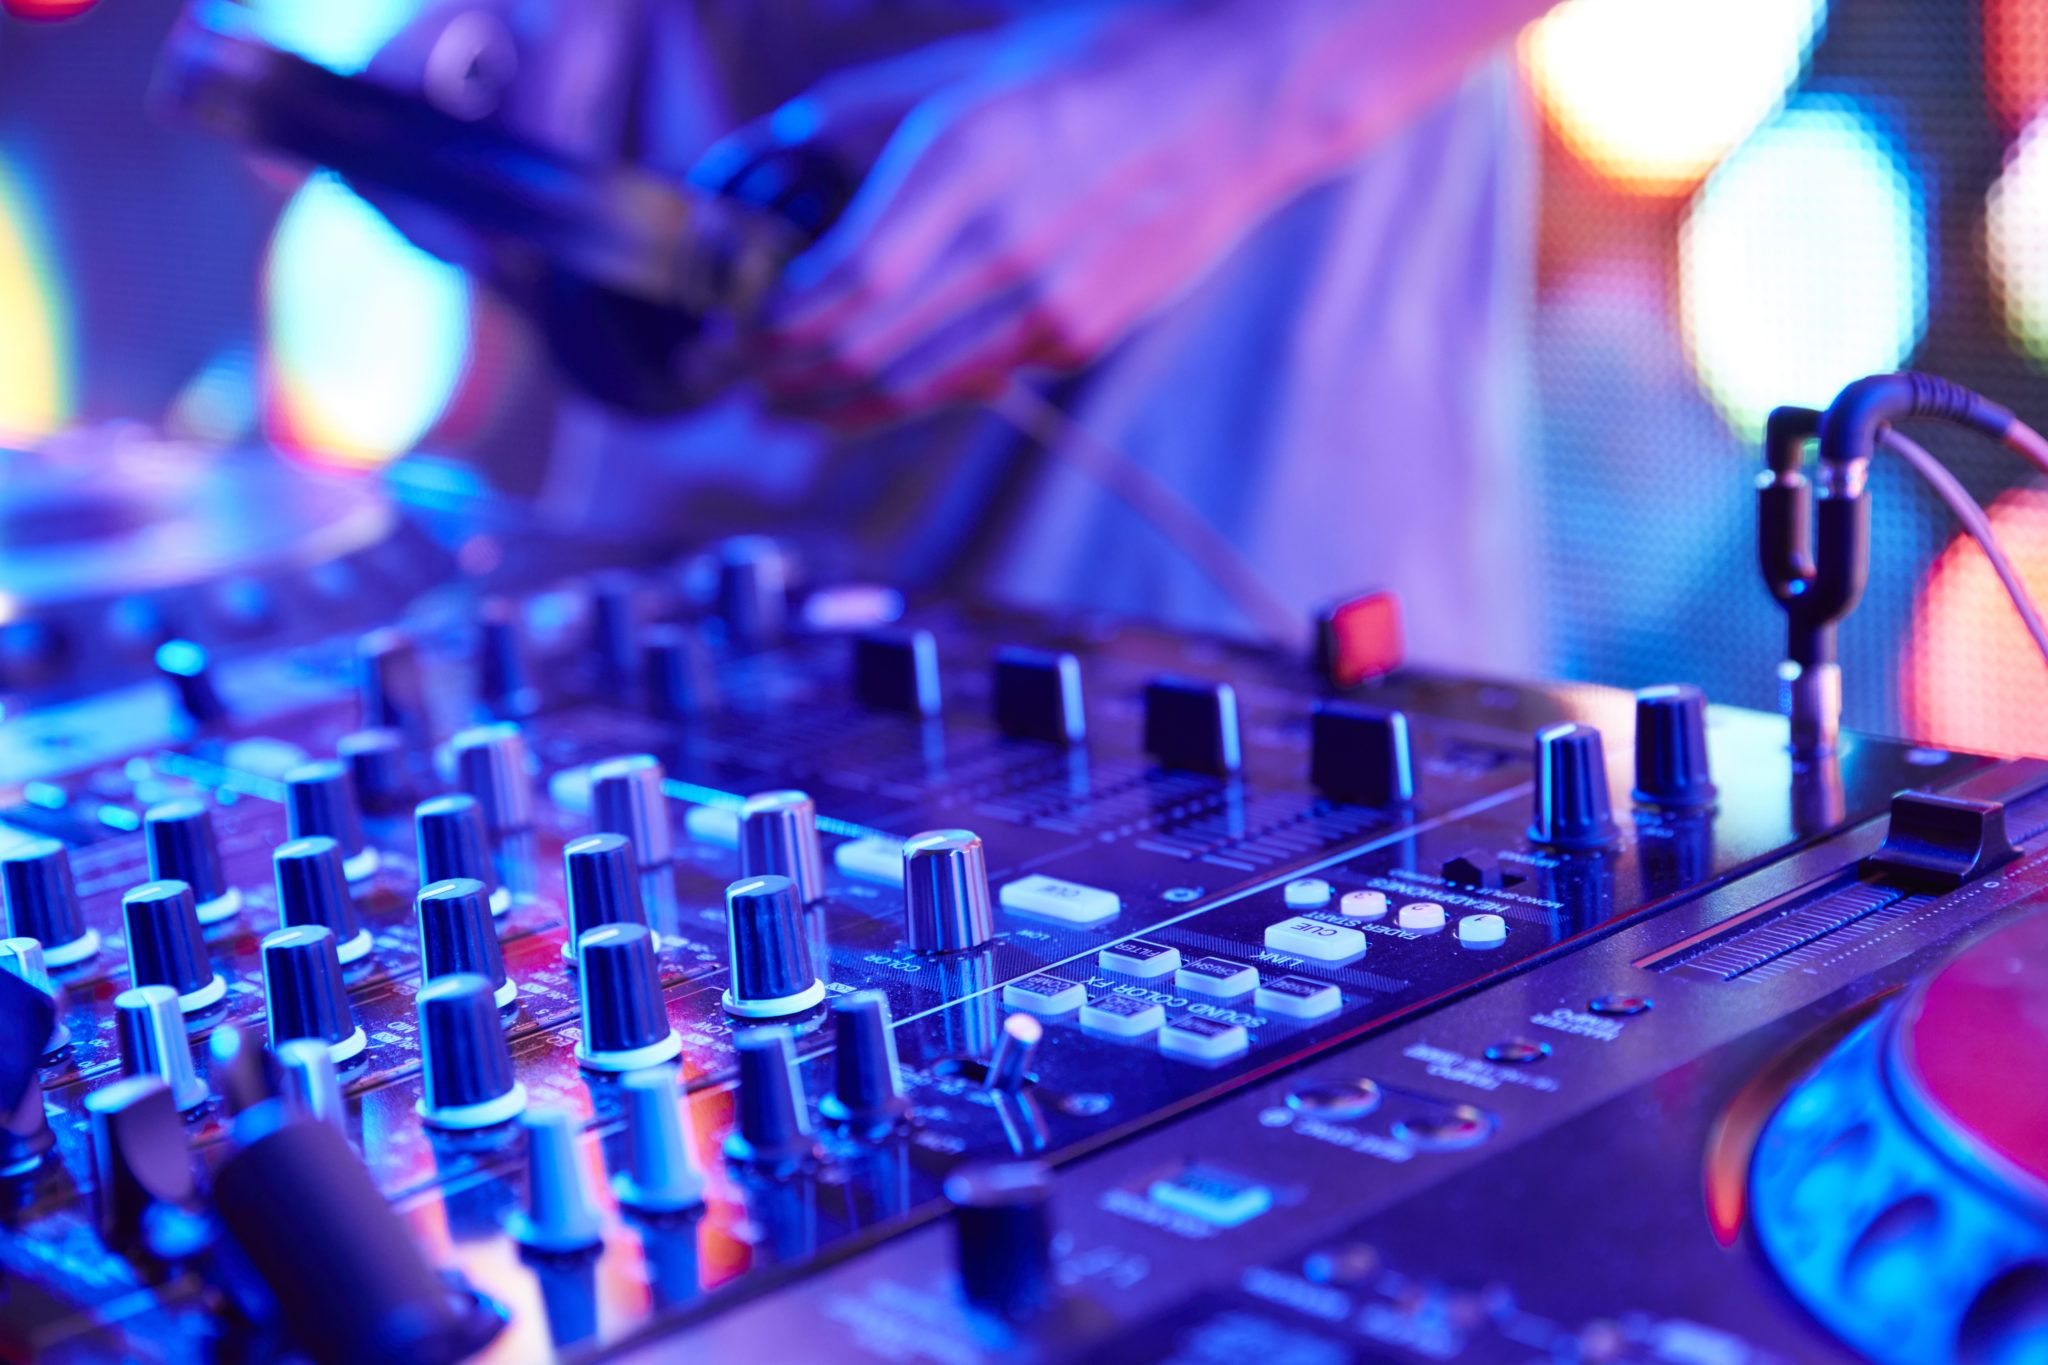 Close contact info not collected from nightclubs and music venues as HSE focuses on “priority areas”